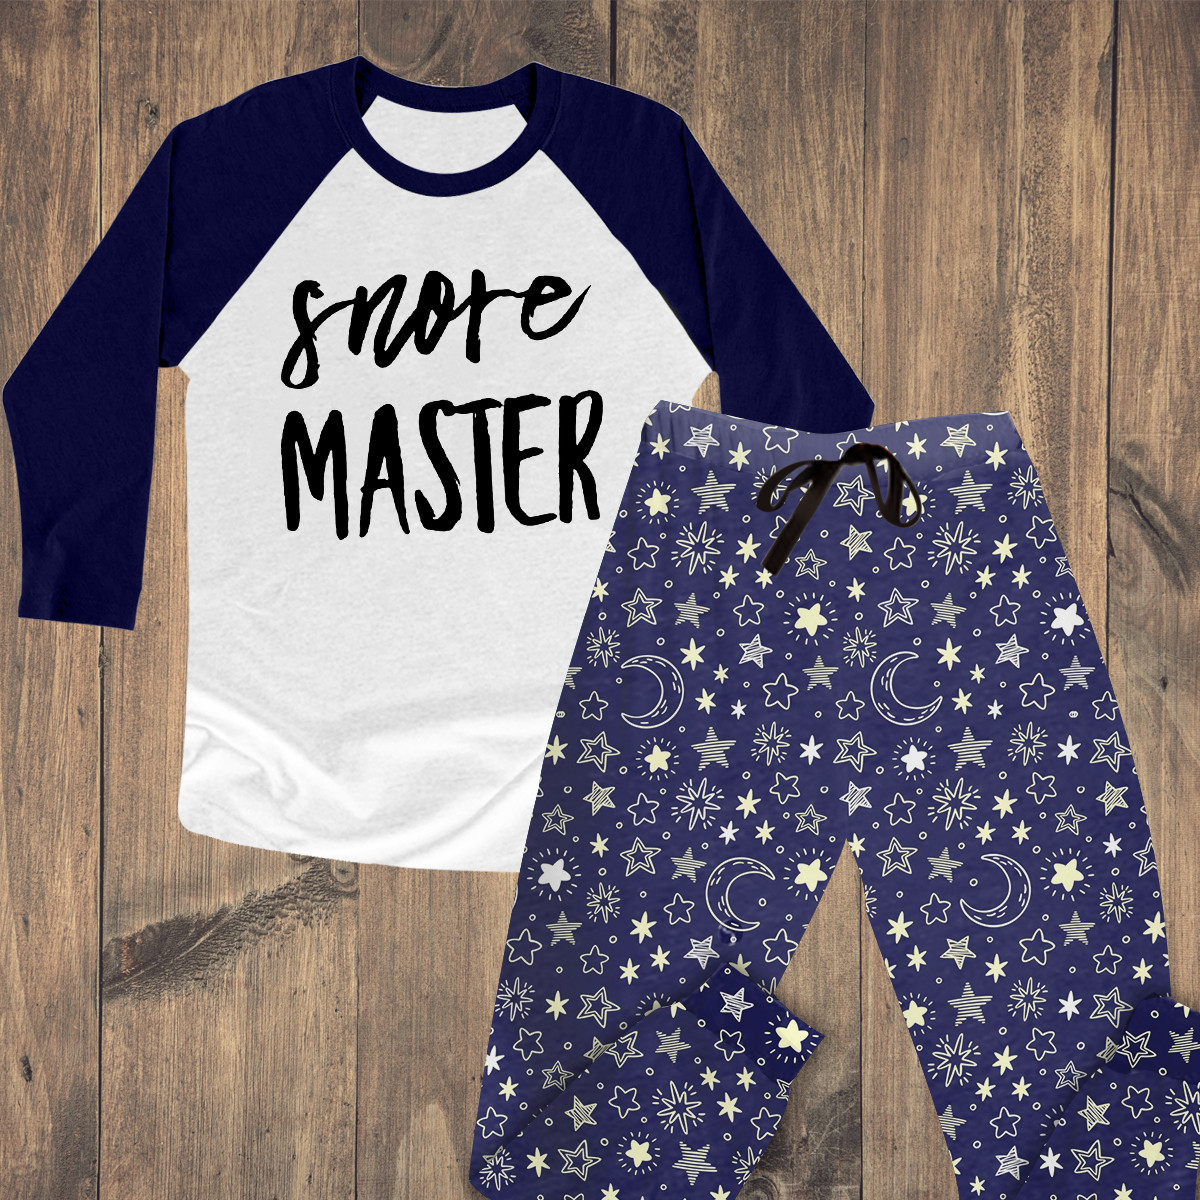 Matching Raglan Pajamas For Couple Snore Master And Stealer